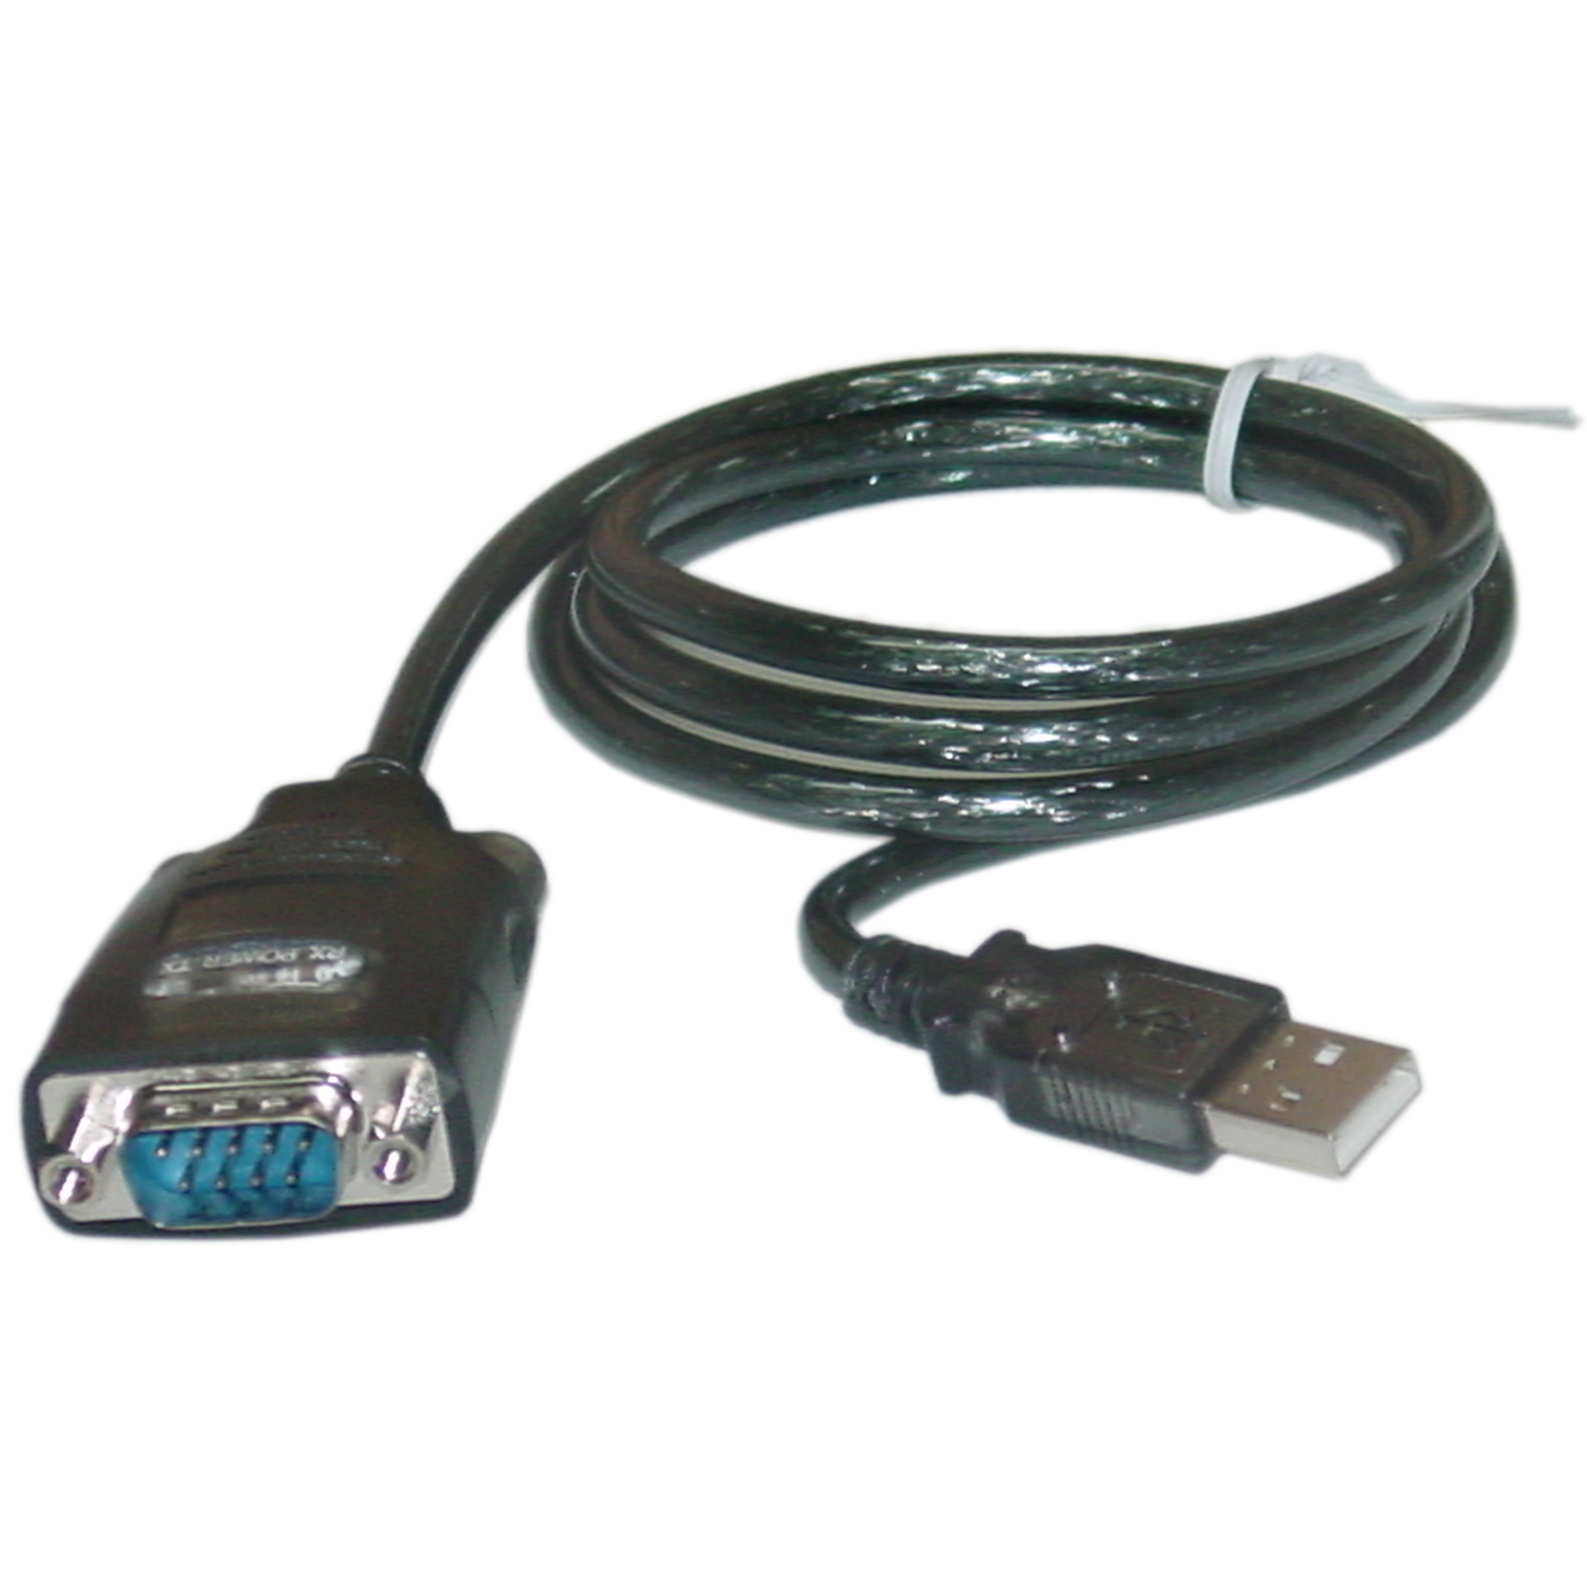 Usb to serial db9 driver download